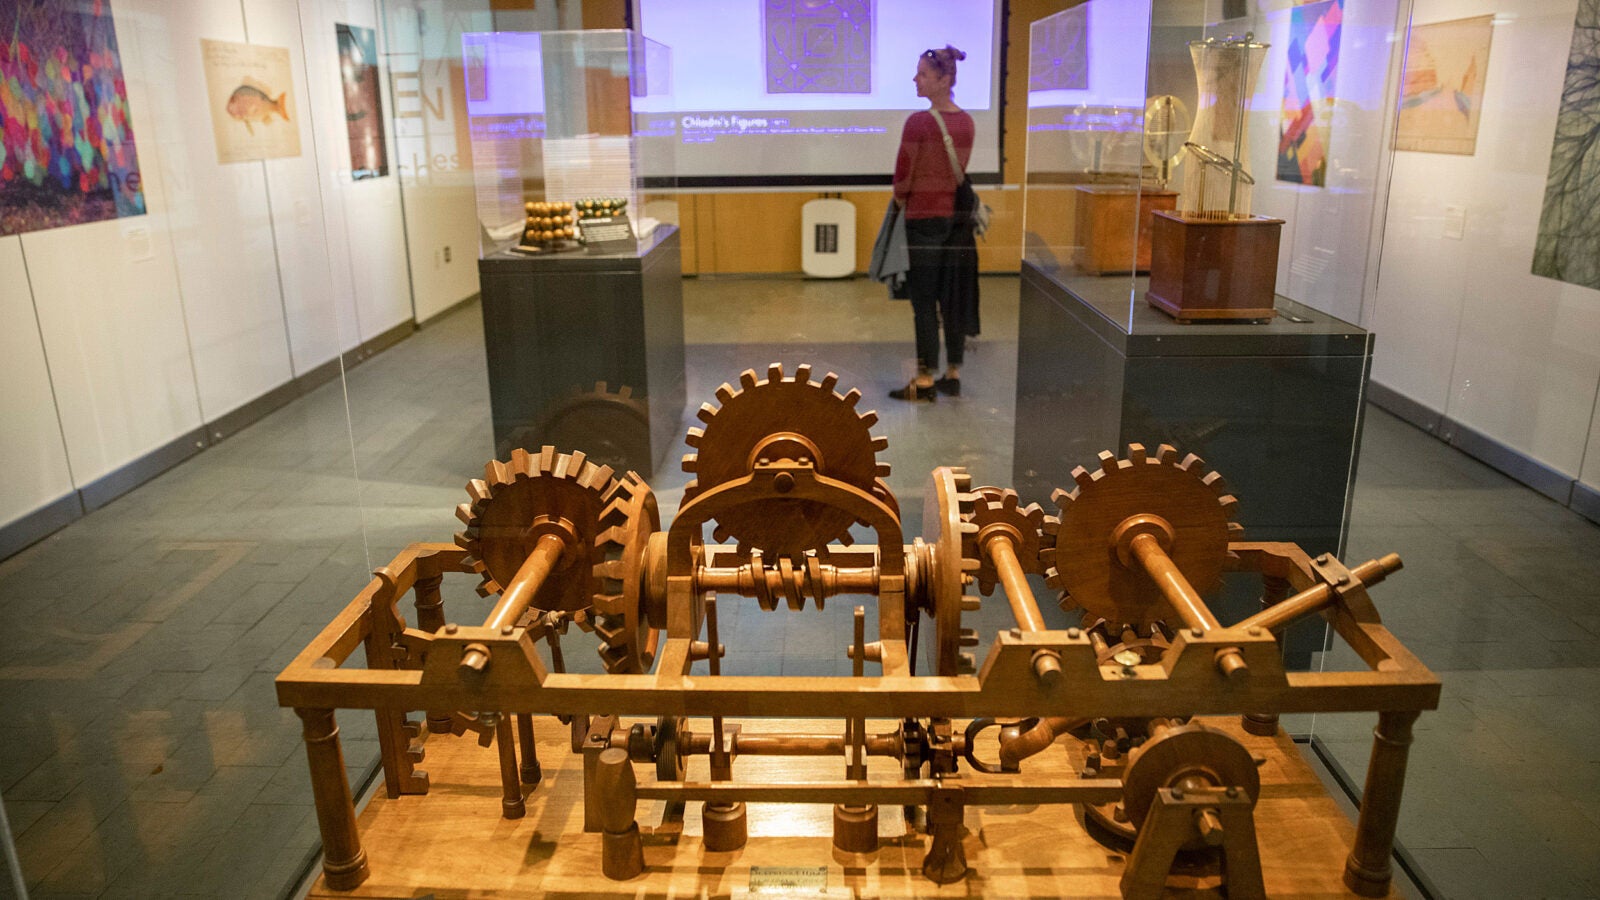 13. Harvard students learned mechanics from this wooden model of interlocking gears that was deployed in mills.